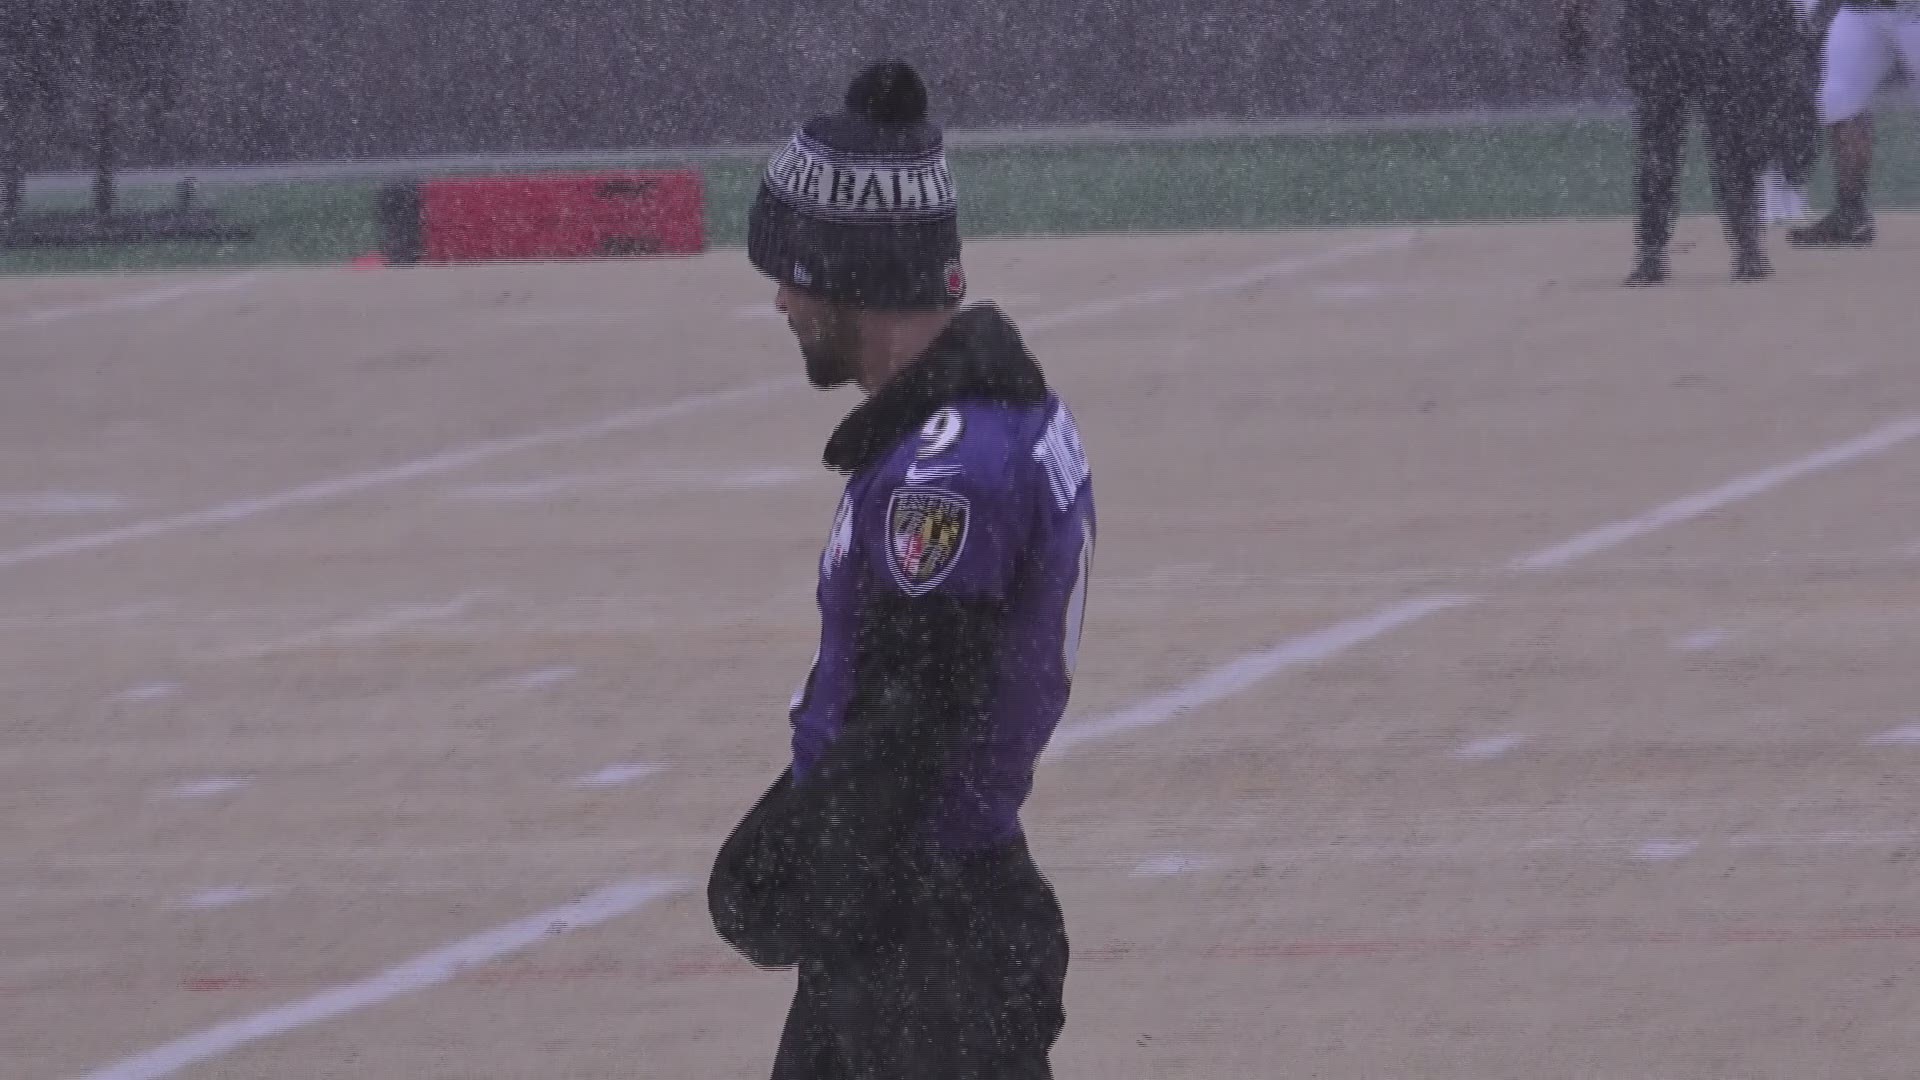 Lamar Jackson celebrated his 23rd birthday by practicing in the snow with his Baltimore Ravens teammates ahead of its game with the Titans.